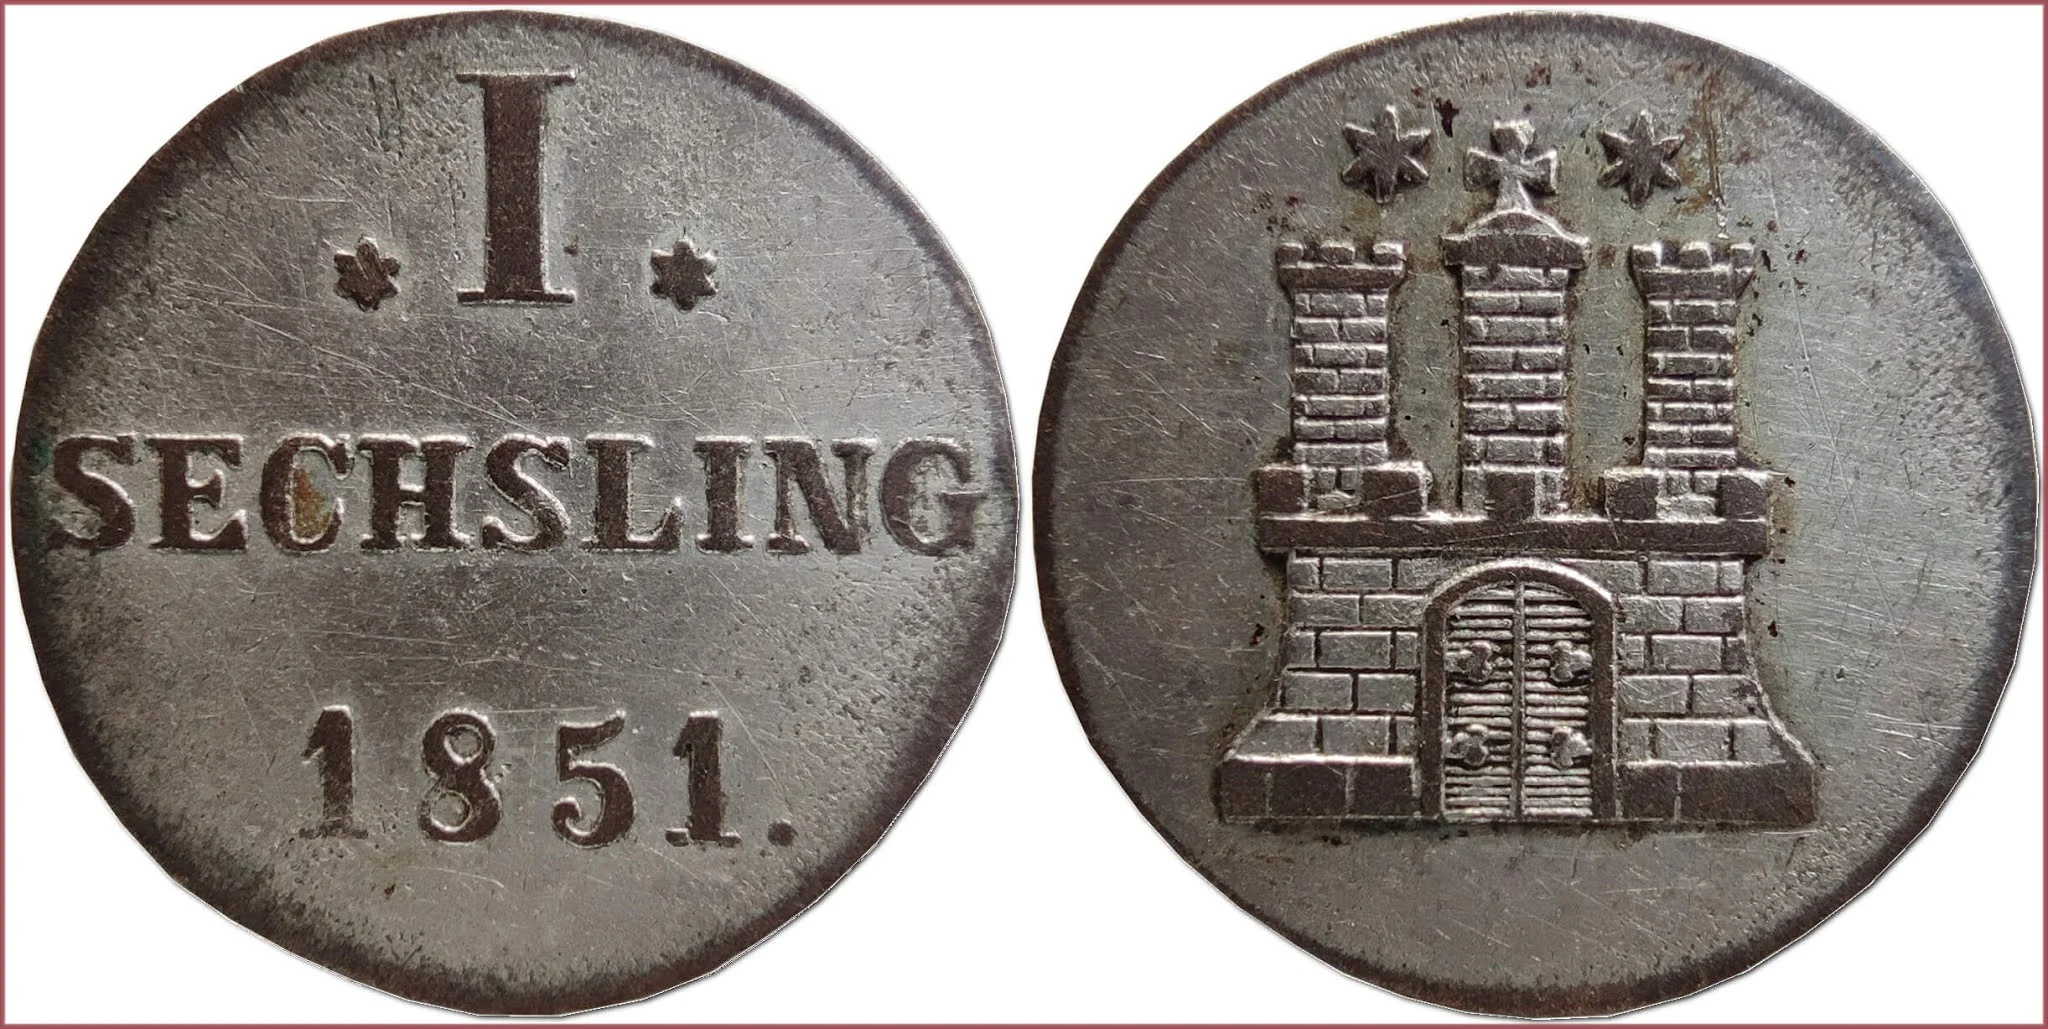 1 sechsling, 1851: Free and Hanseatic City of Hamburg